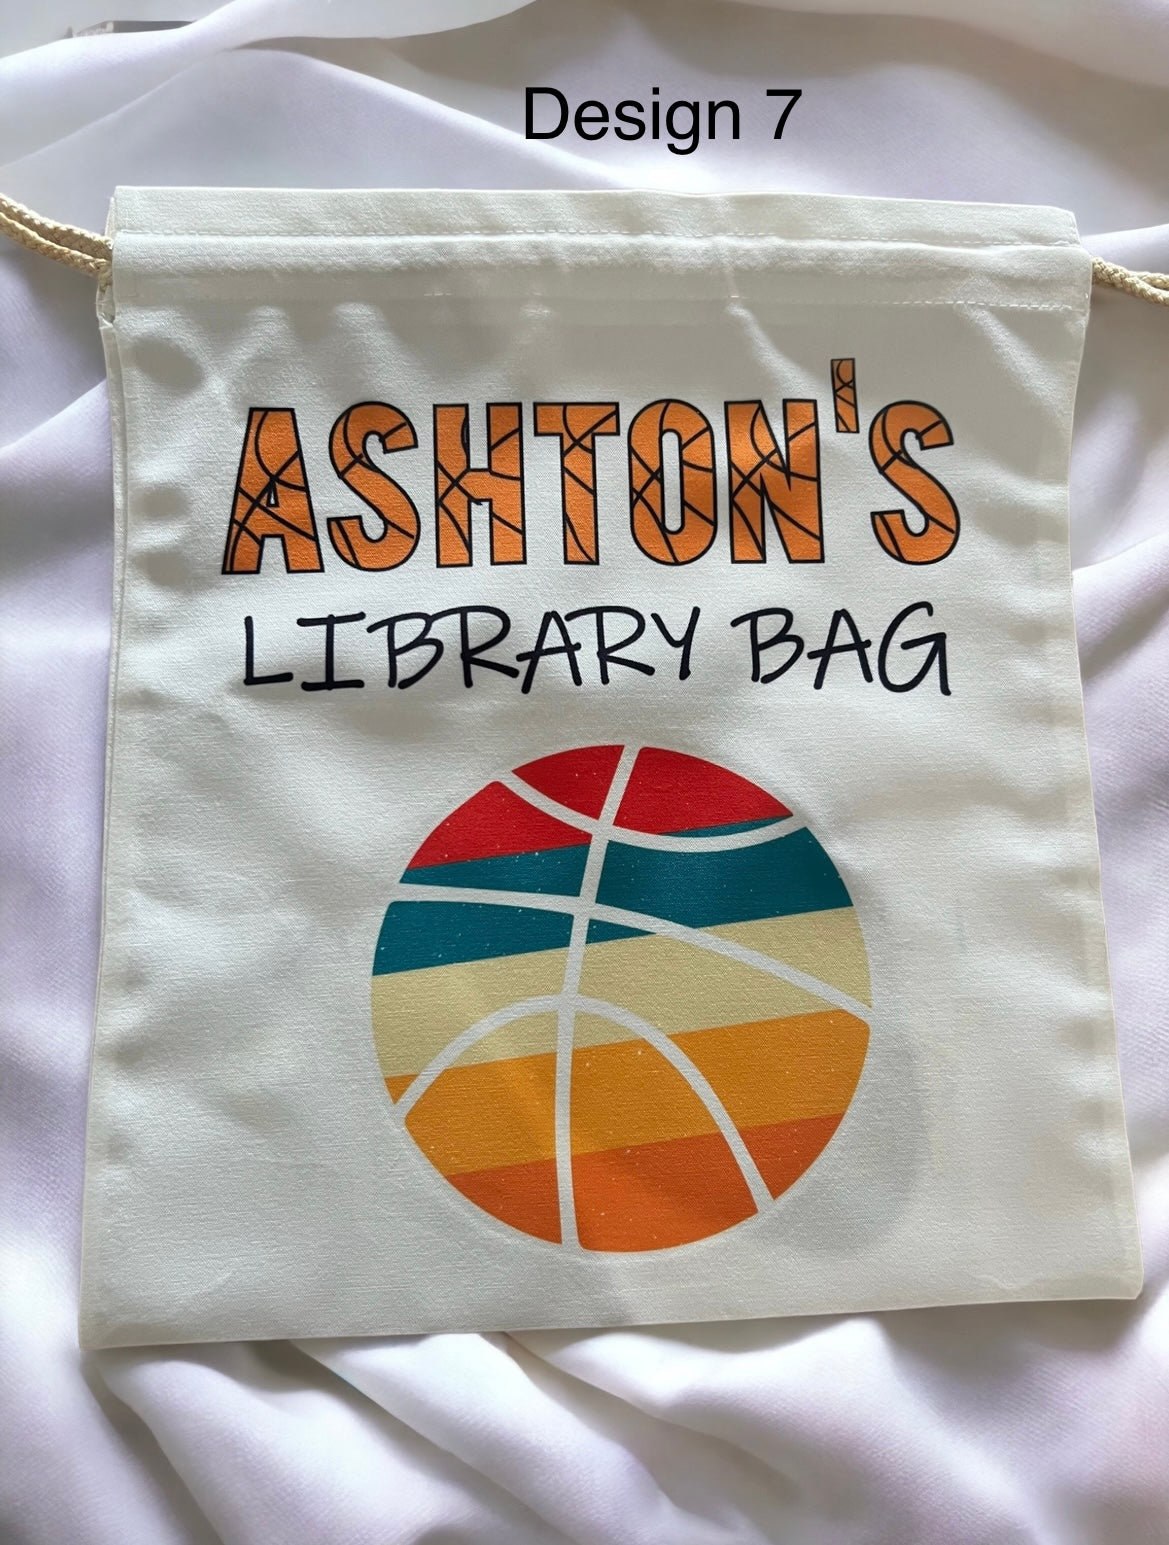 Personalised library bags